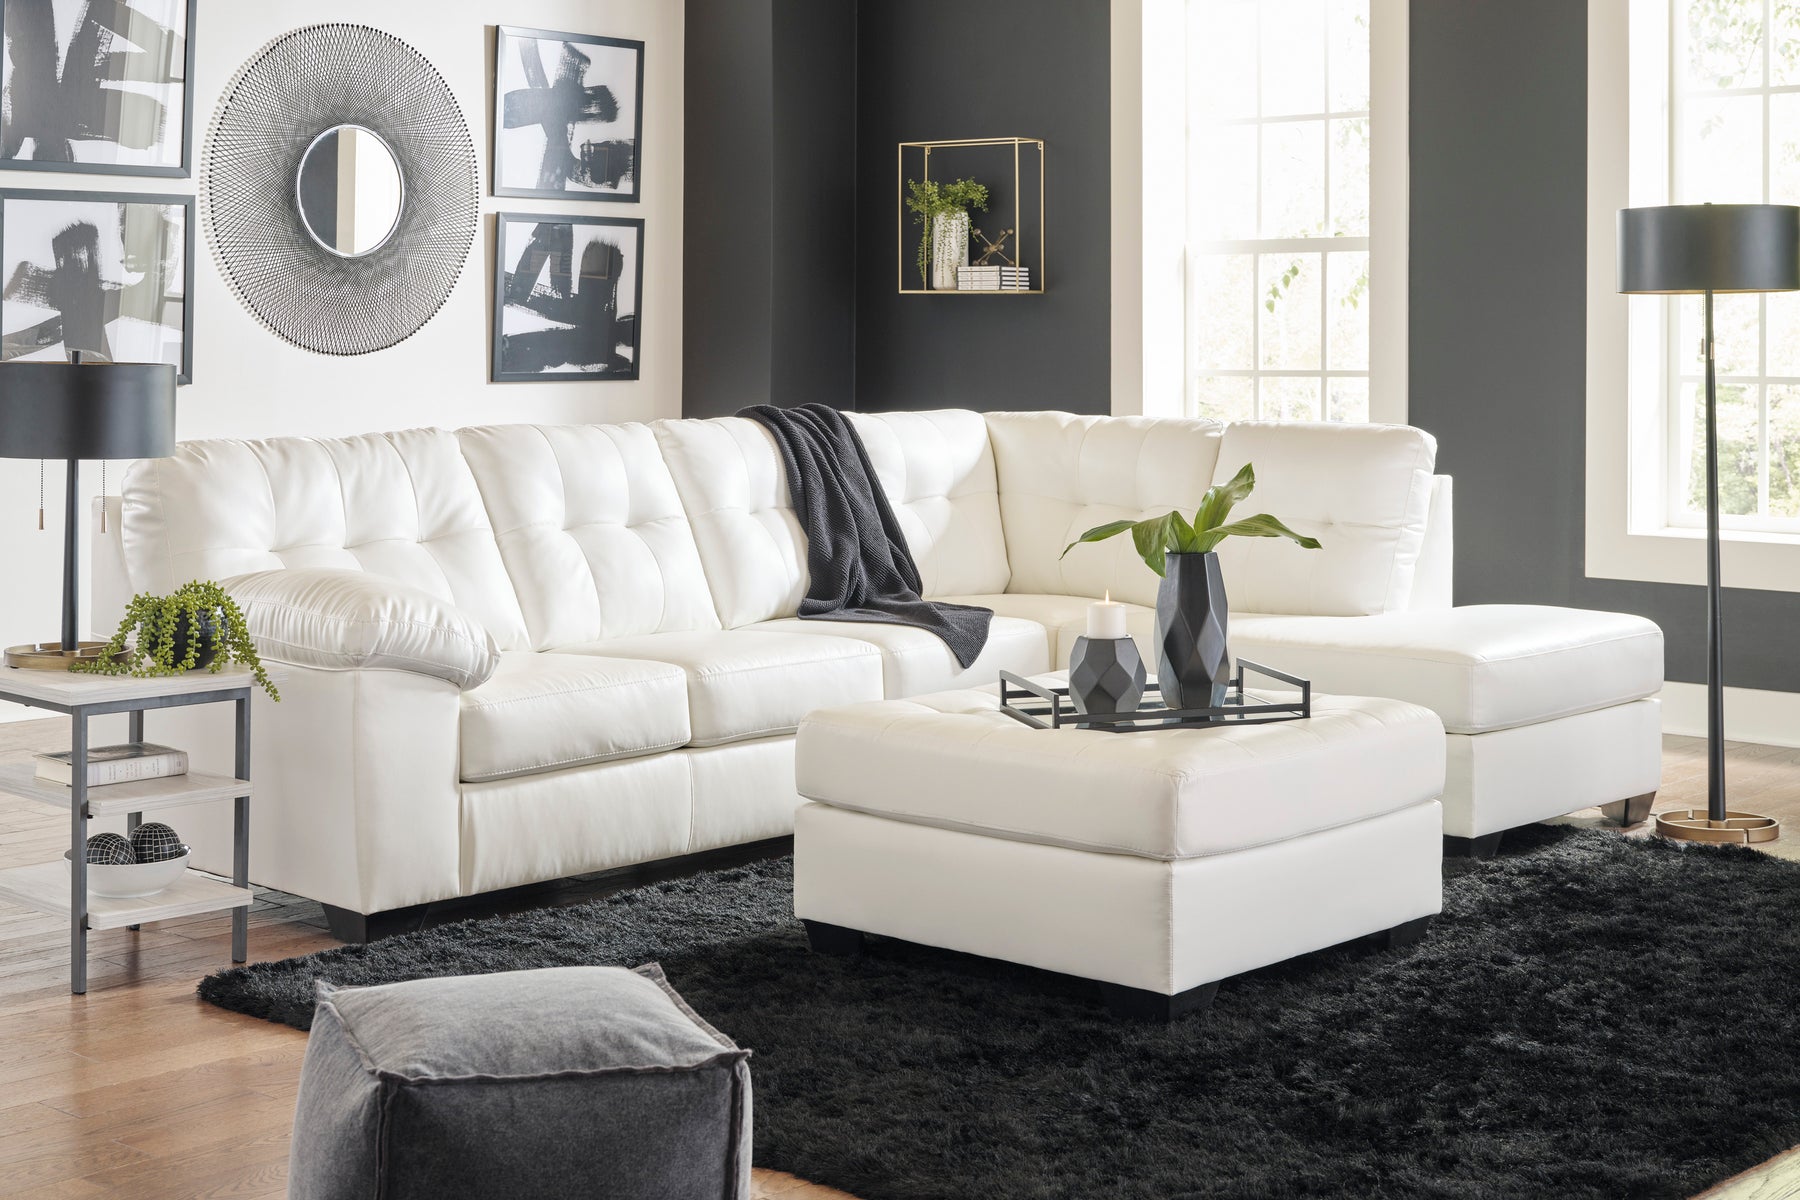 Donlen 2 Pc Sectional Living Room Donlen 2 Pc Sectional Living Room | White modern Sectional Las Vegas Furniture store Half Price Furniture